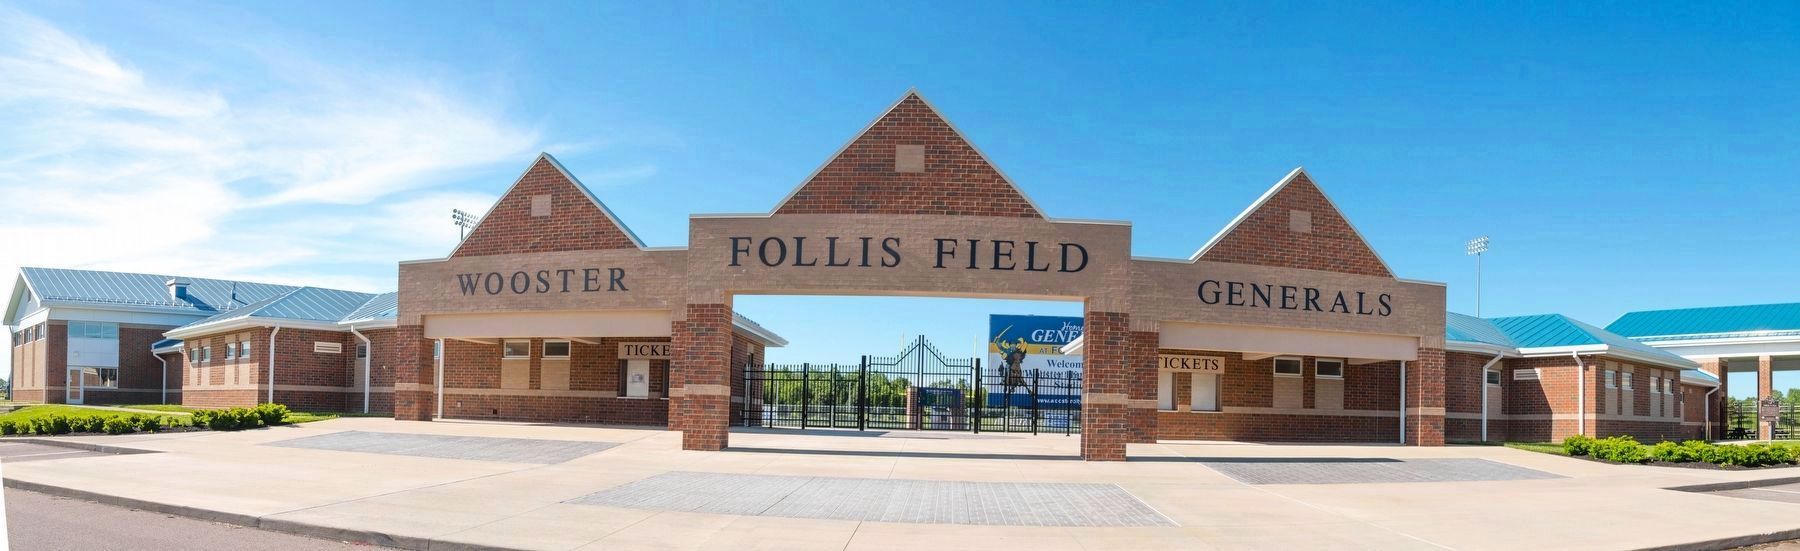 Follis Field Entrance, Wooster Ohio image. Click for full size.